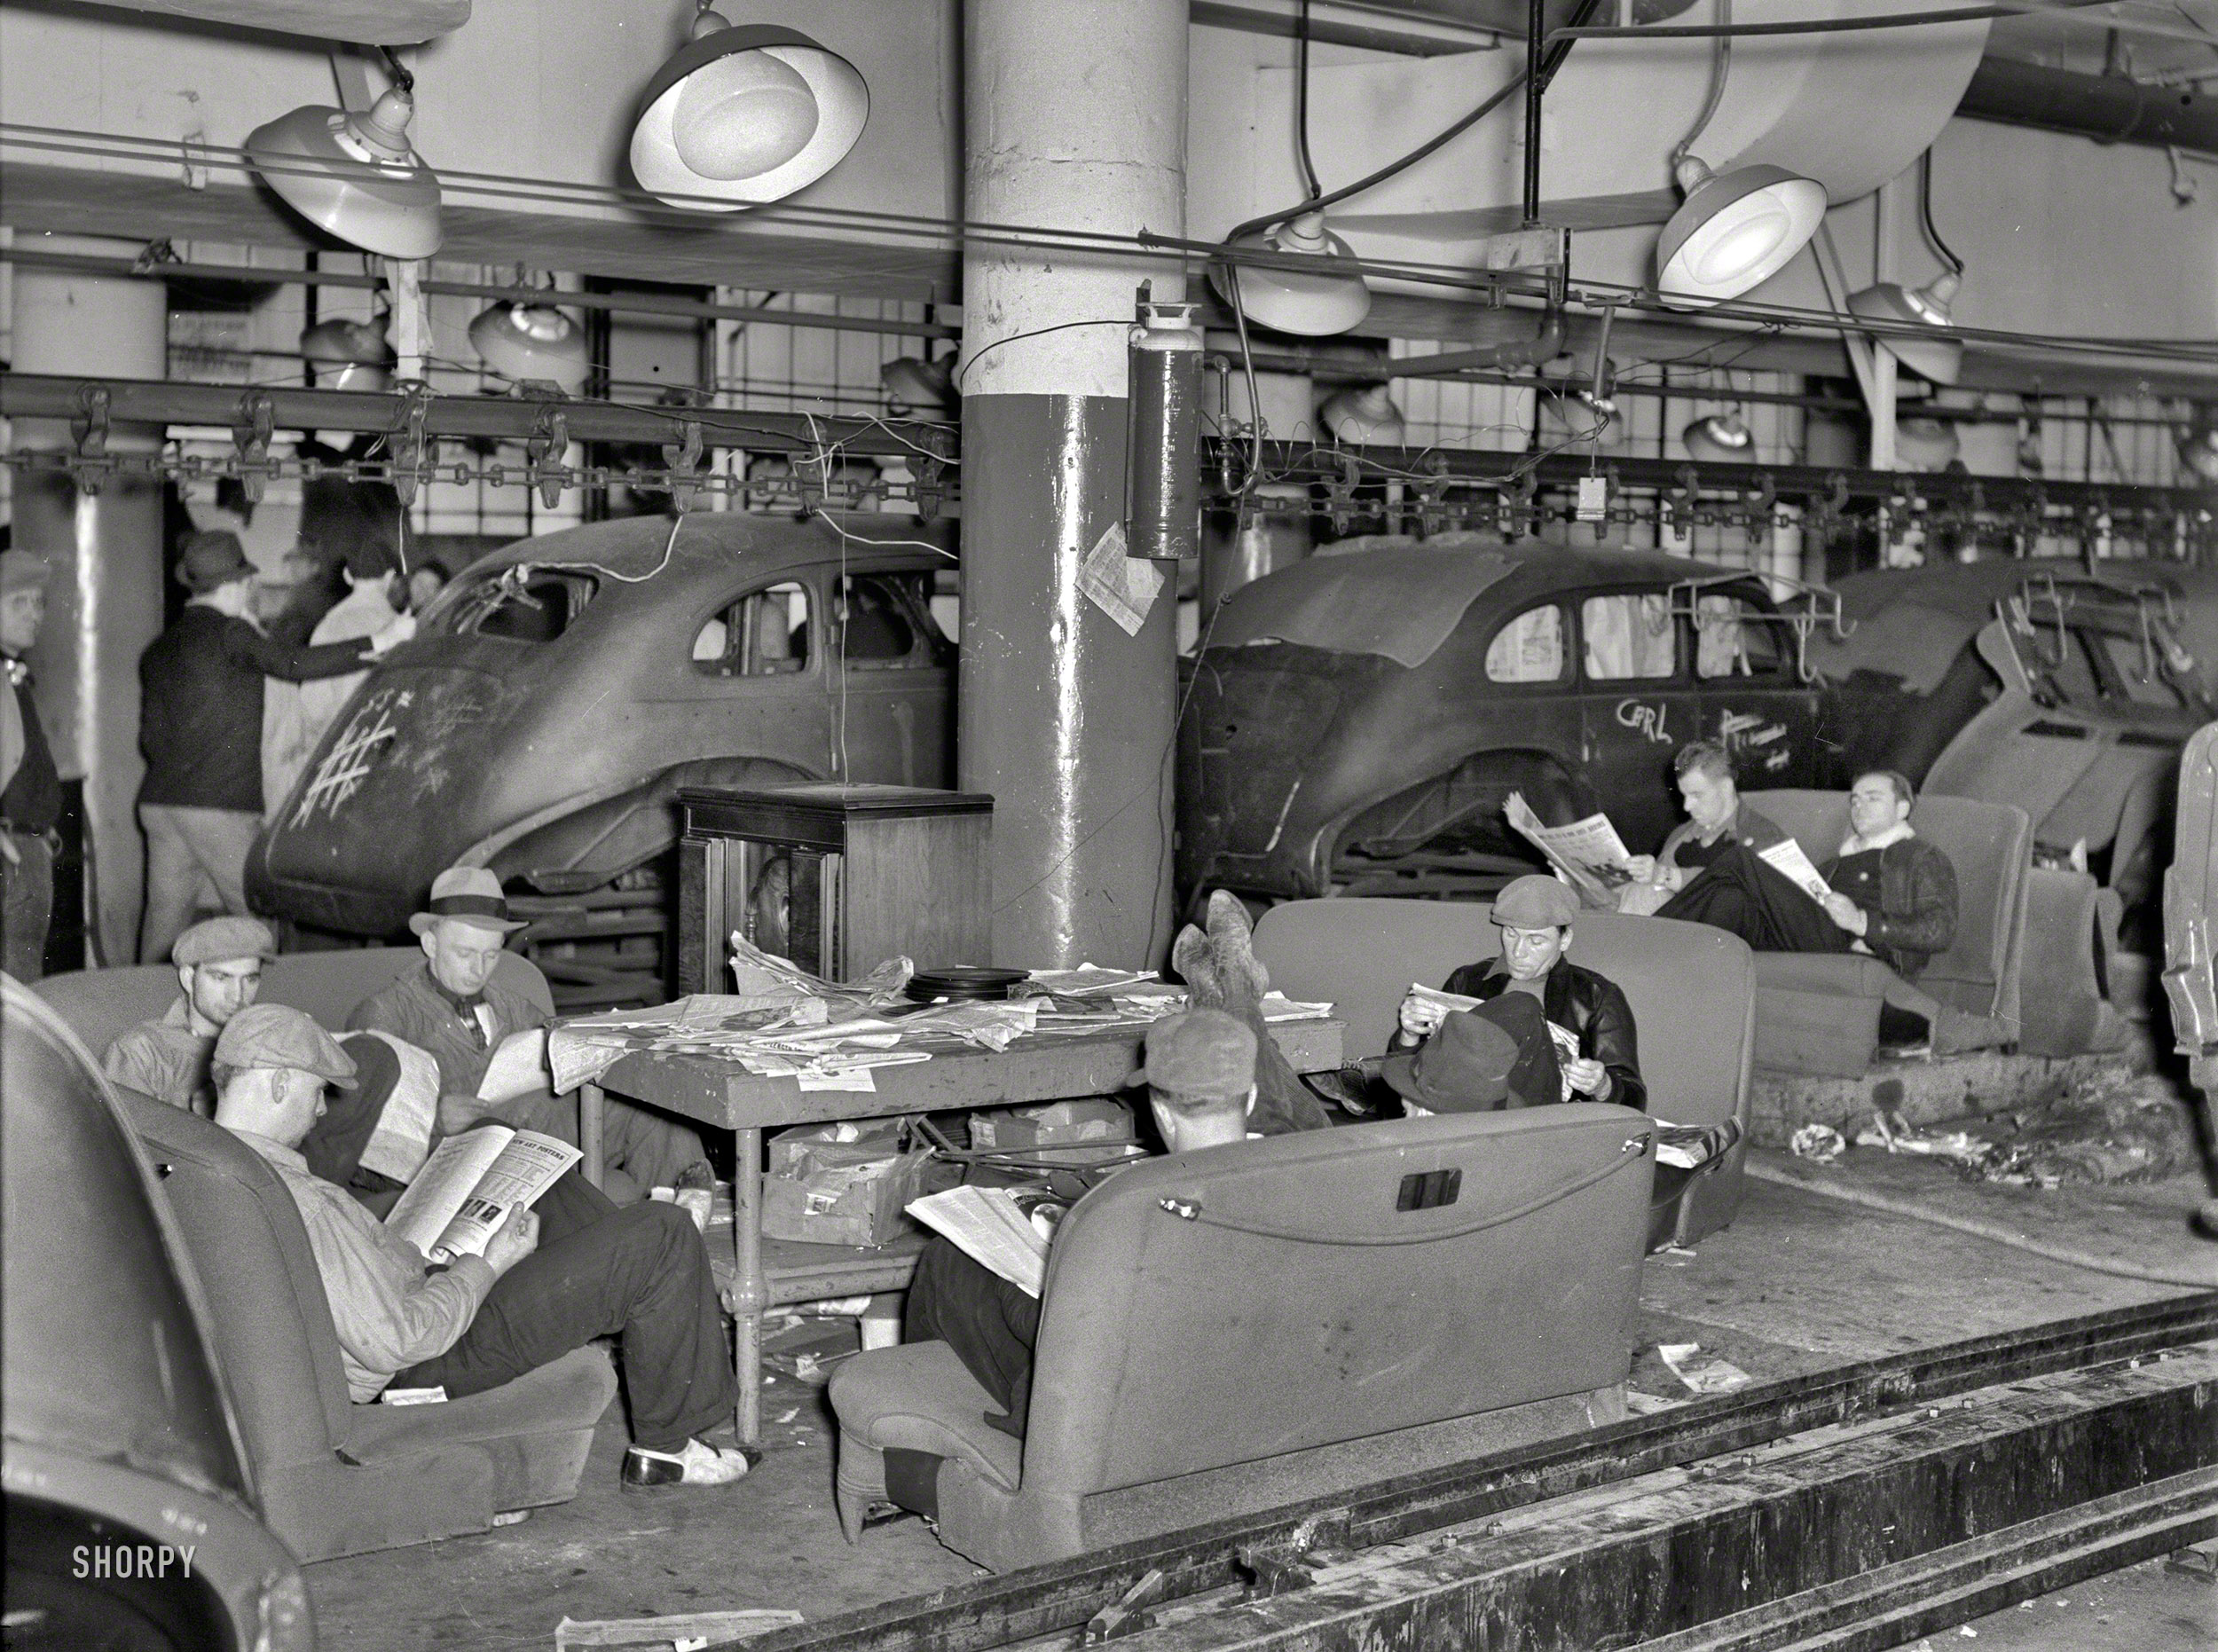 January 1937. Flint, Michigan. "Sit-down strikers. Fisher Body plant No. 3." The labor action that led to the unionization of the American auto industry. Note the "sleeping car" at right. Photo by Sheldon Dick. View full size.